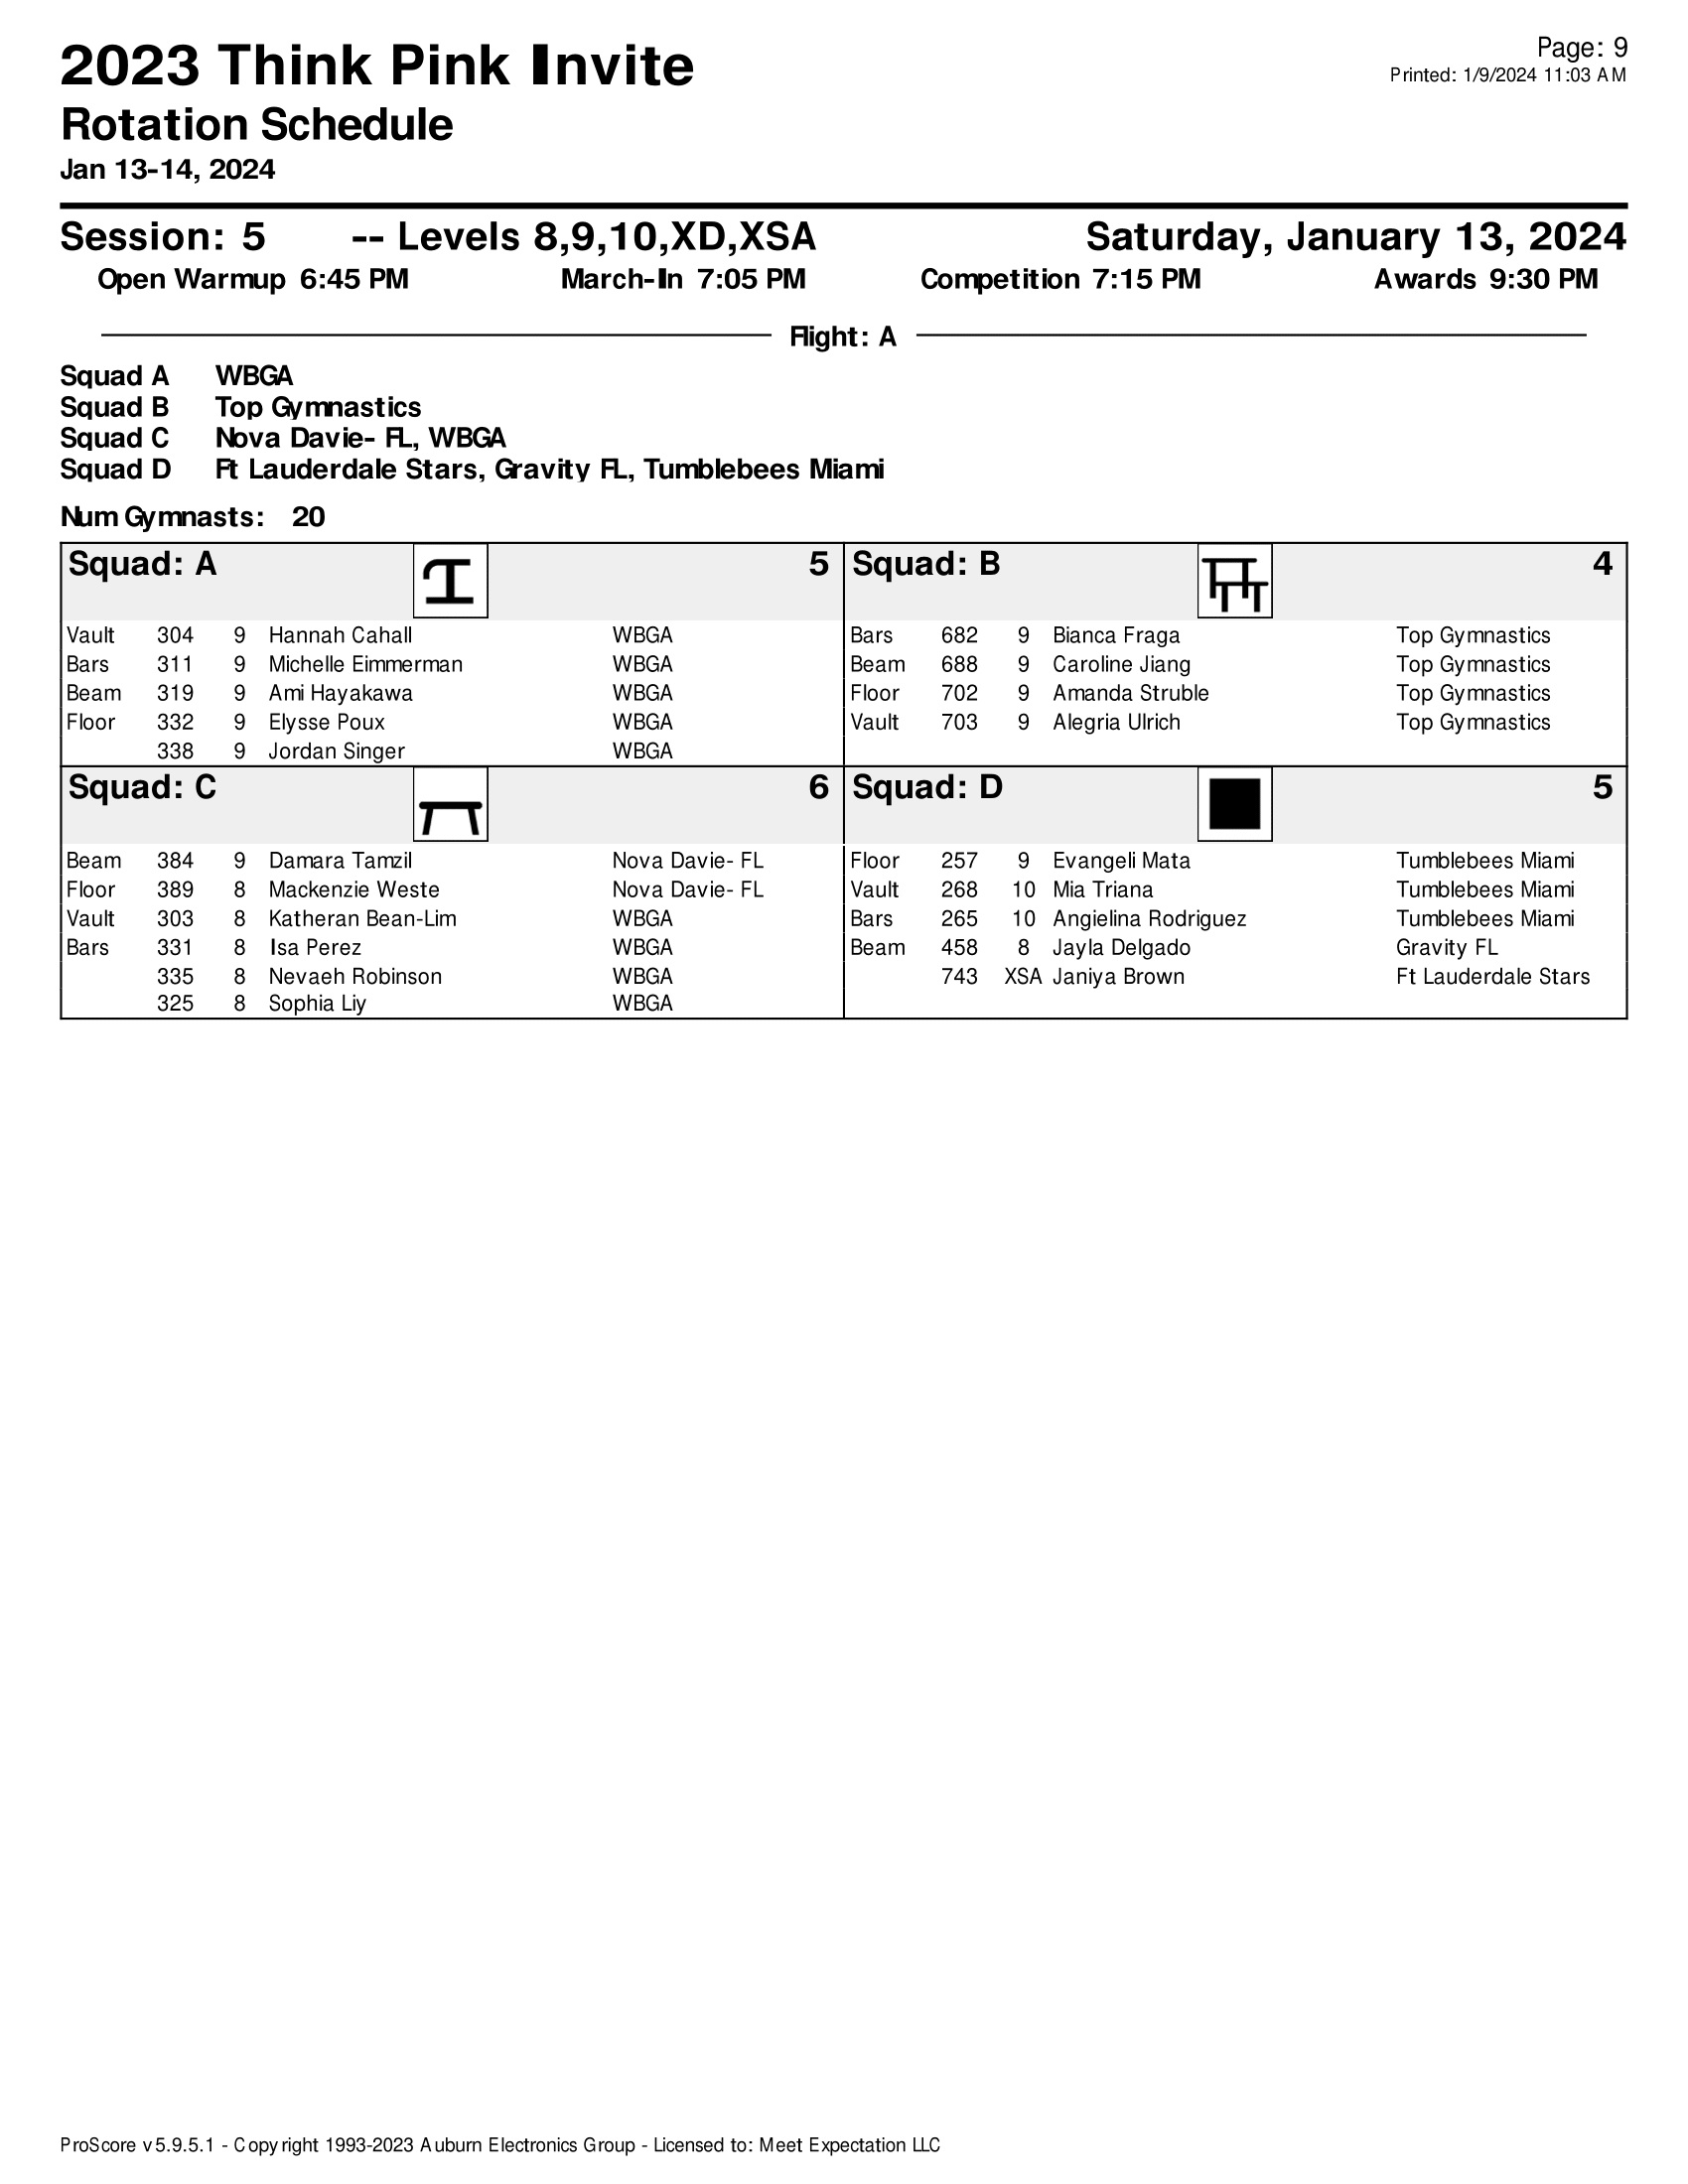 Rotation Sheets updated-09